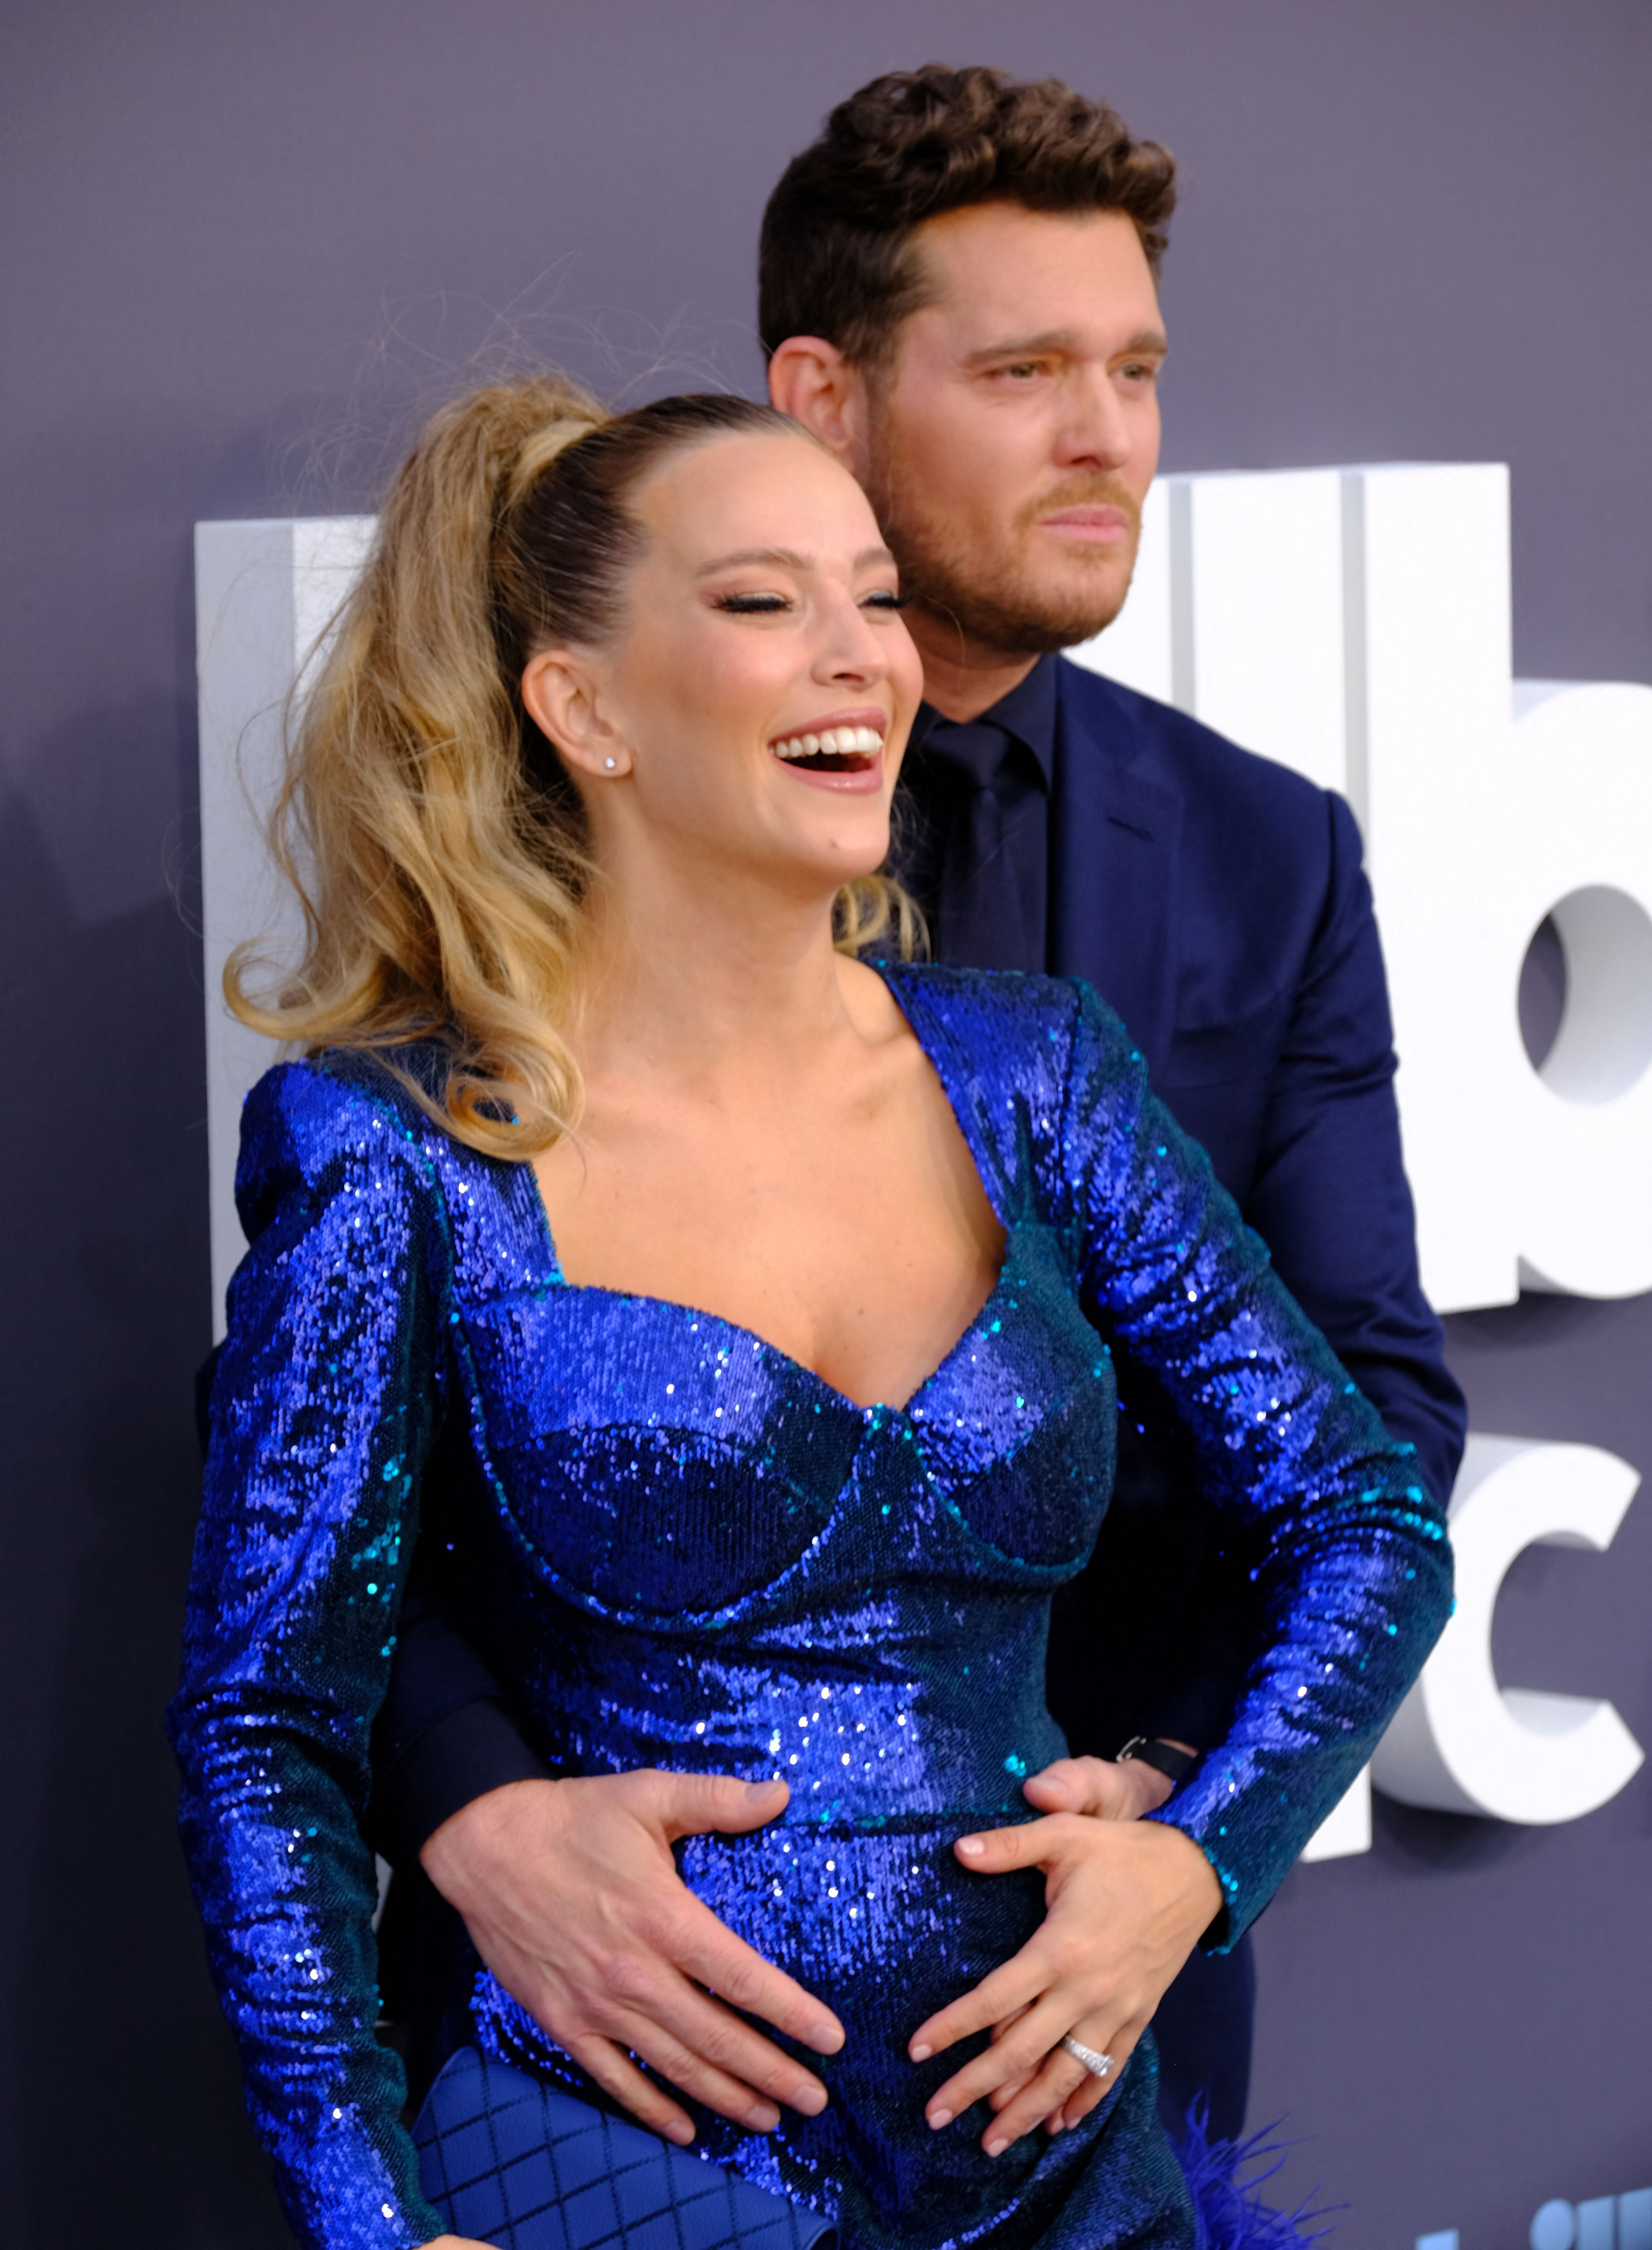 Michael Buble and Luisana Lopilato in Las Vegas 2022. | Source: Getty Images